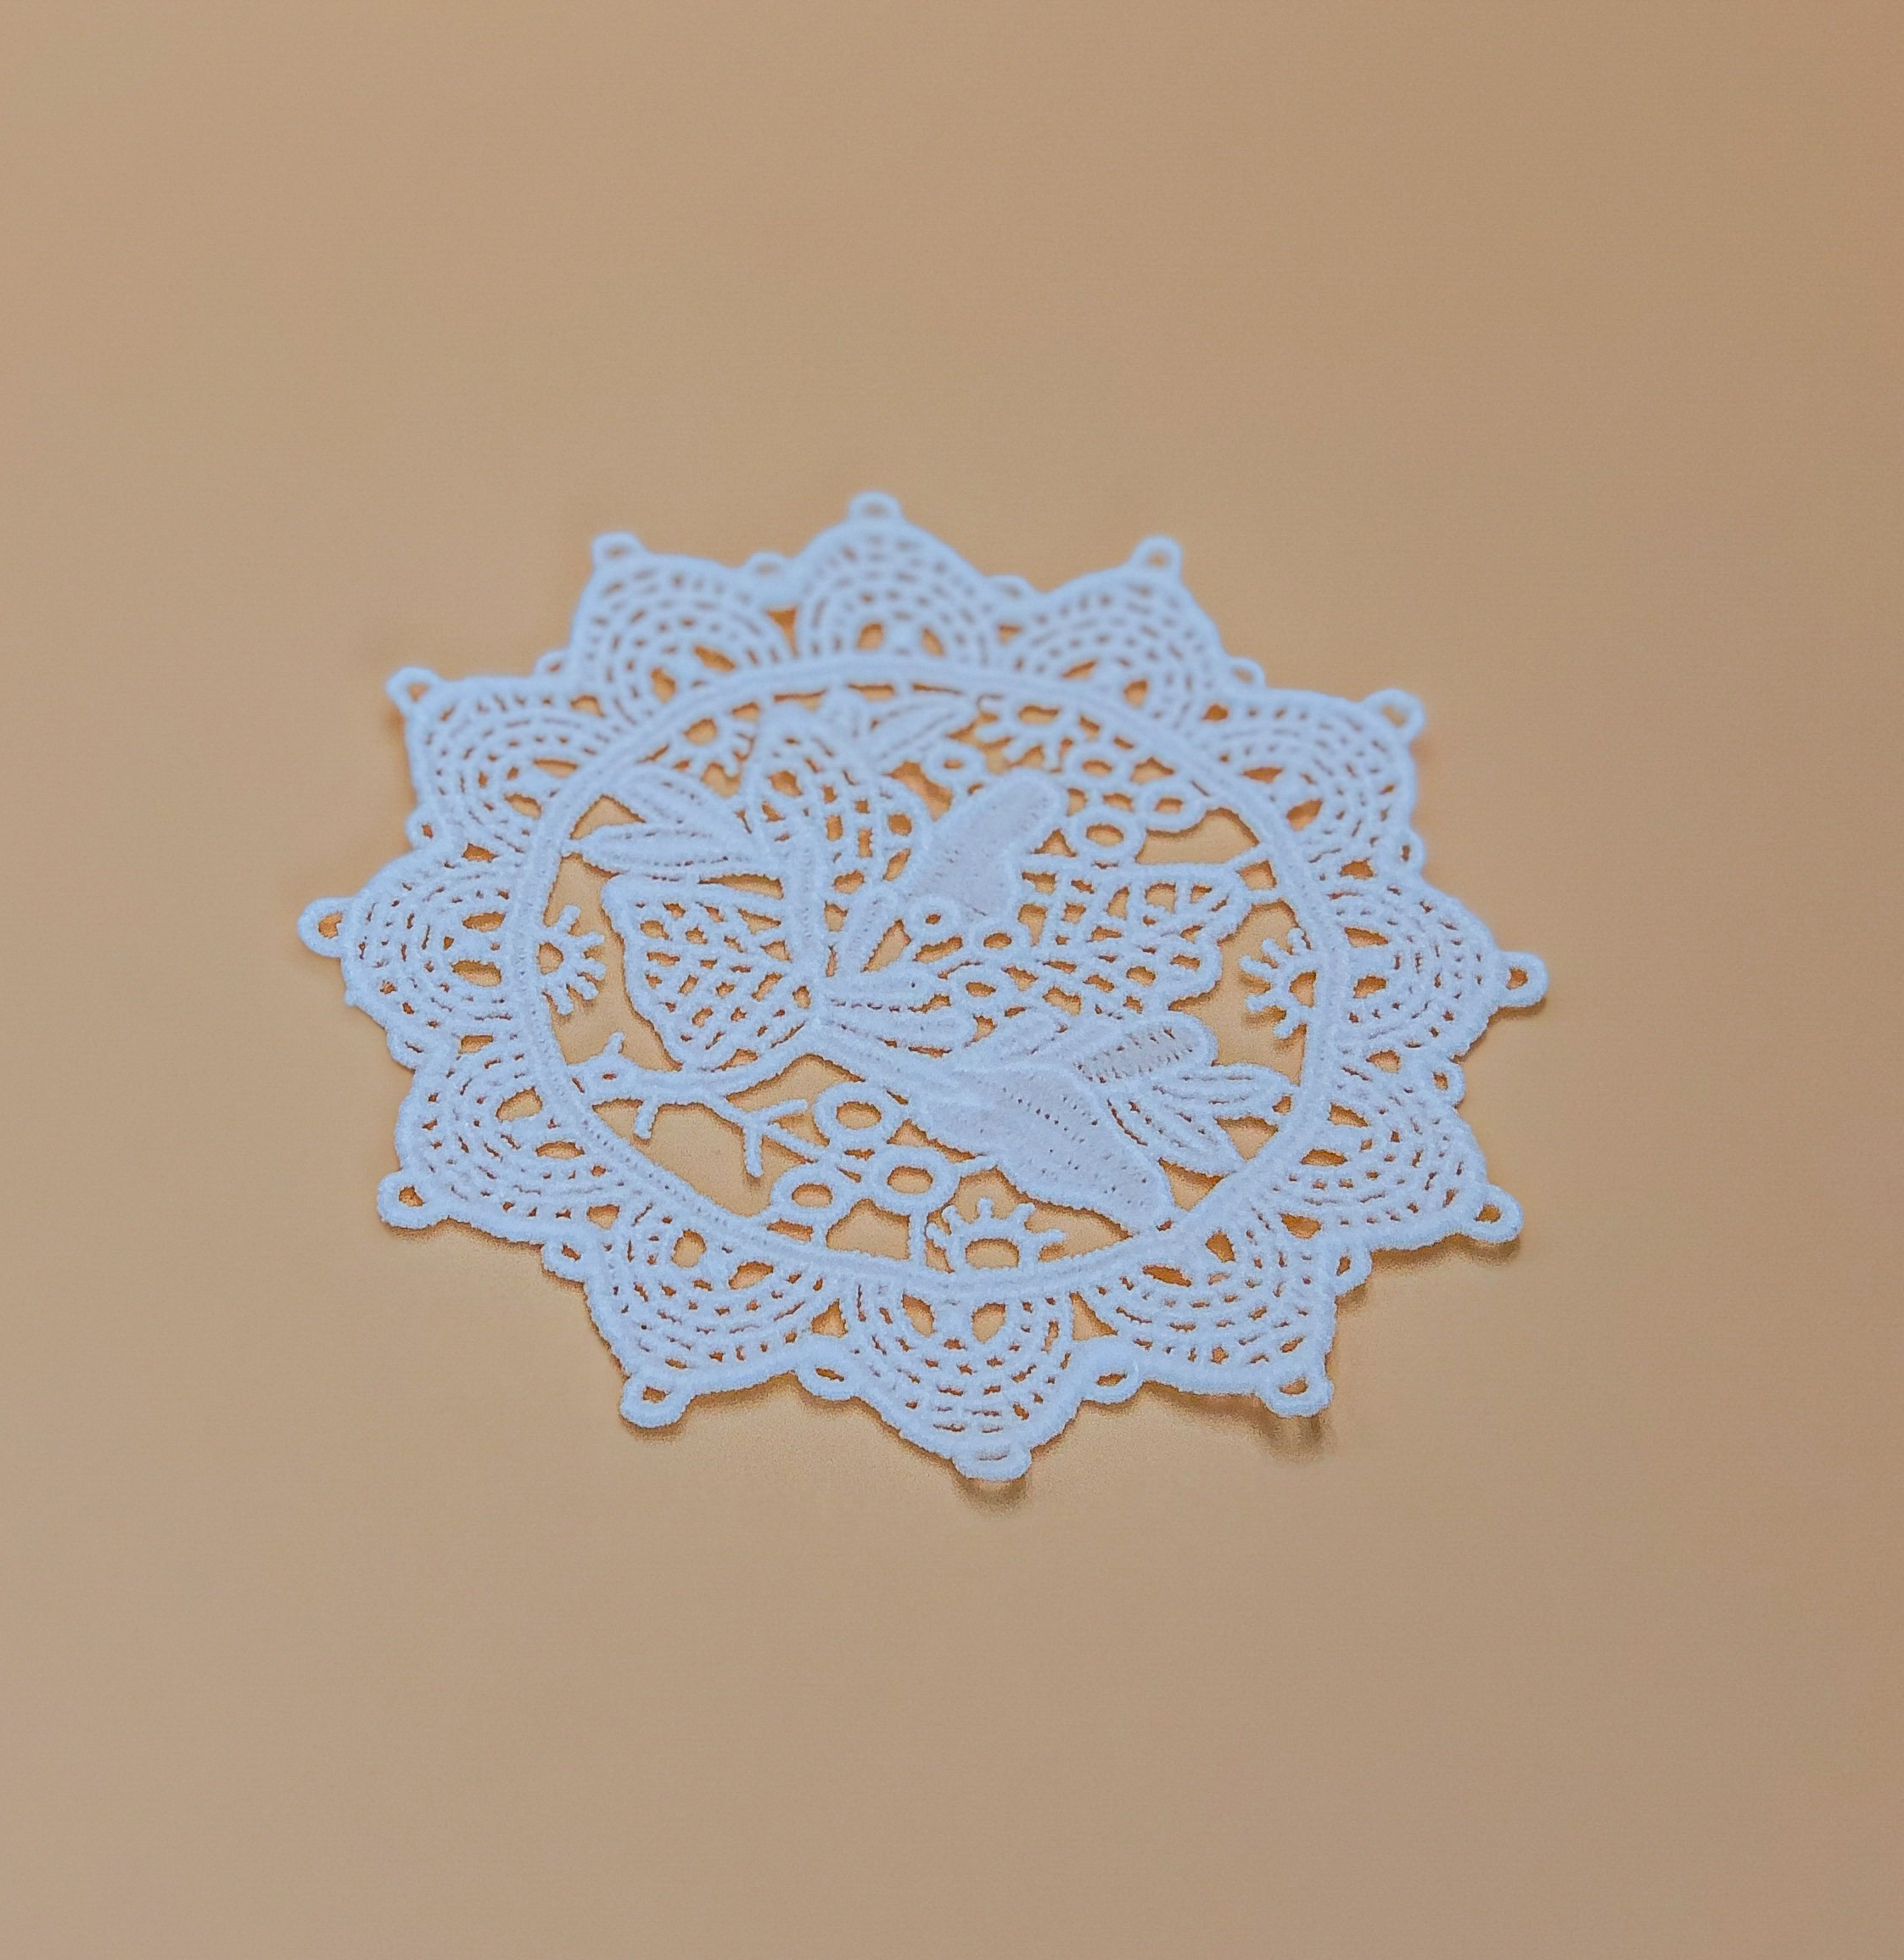 Handmade Lace Coasters by PROSE Tabletop